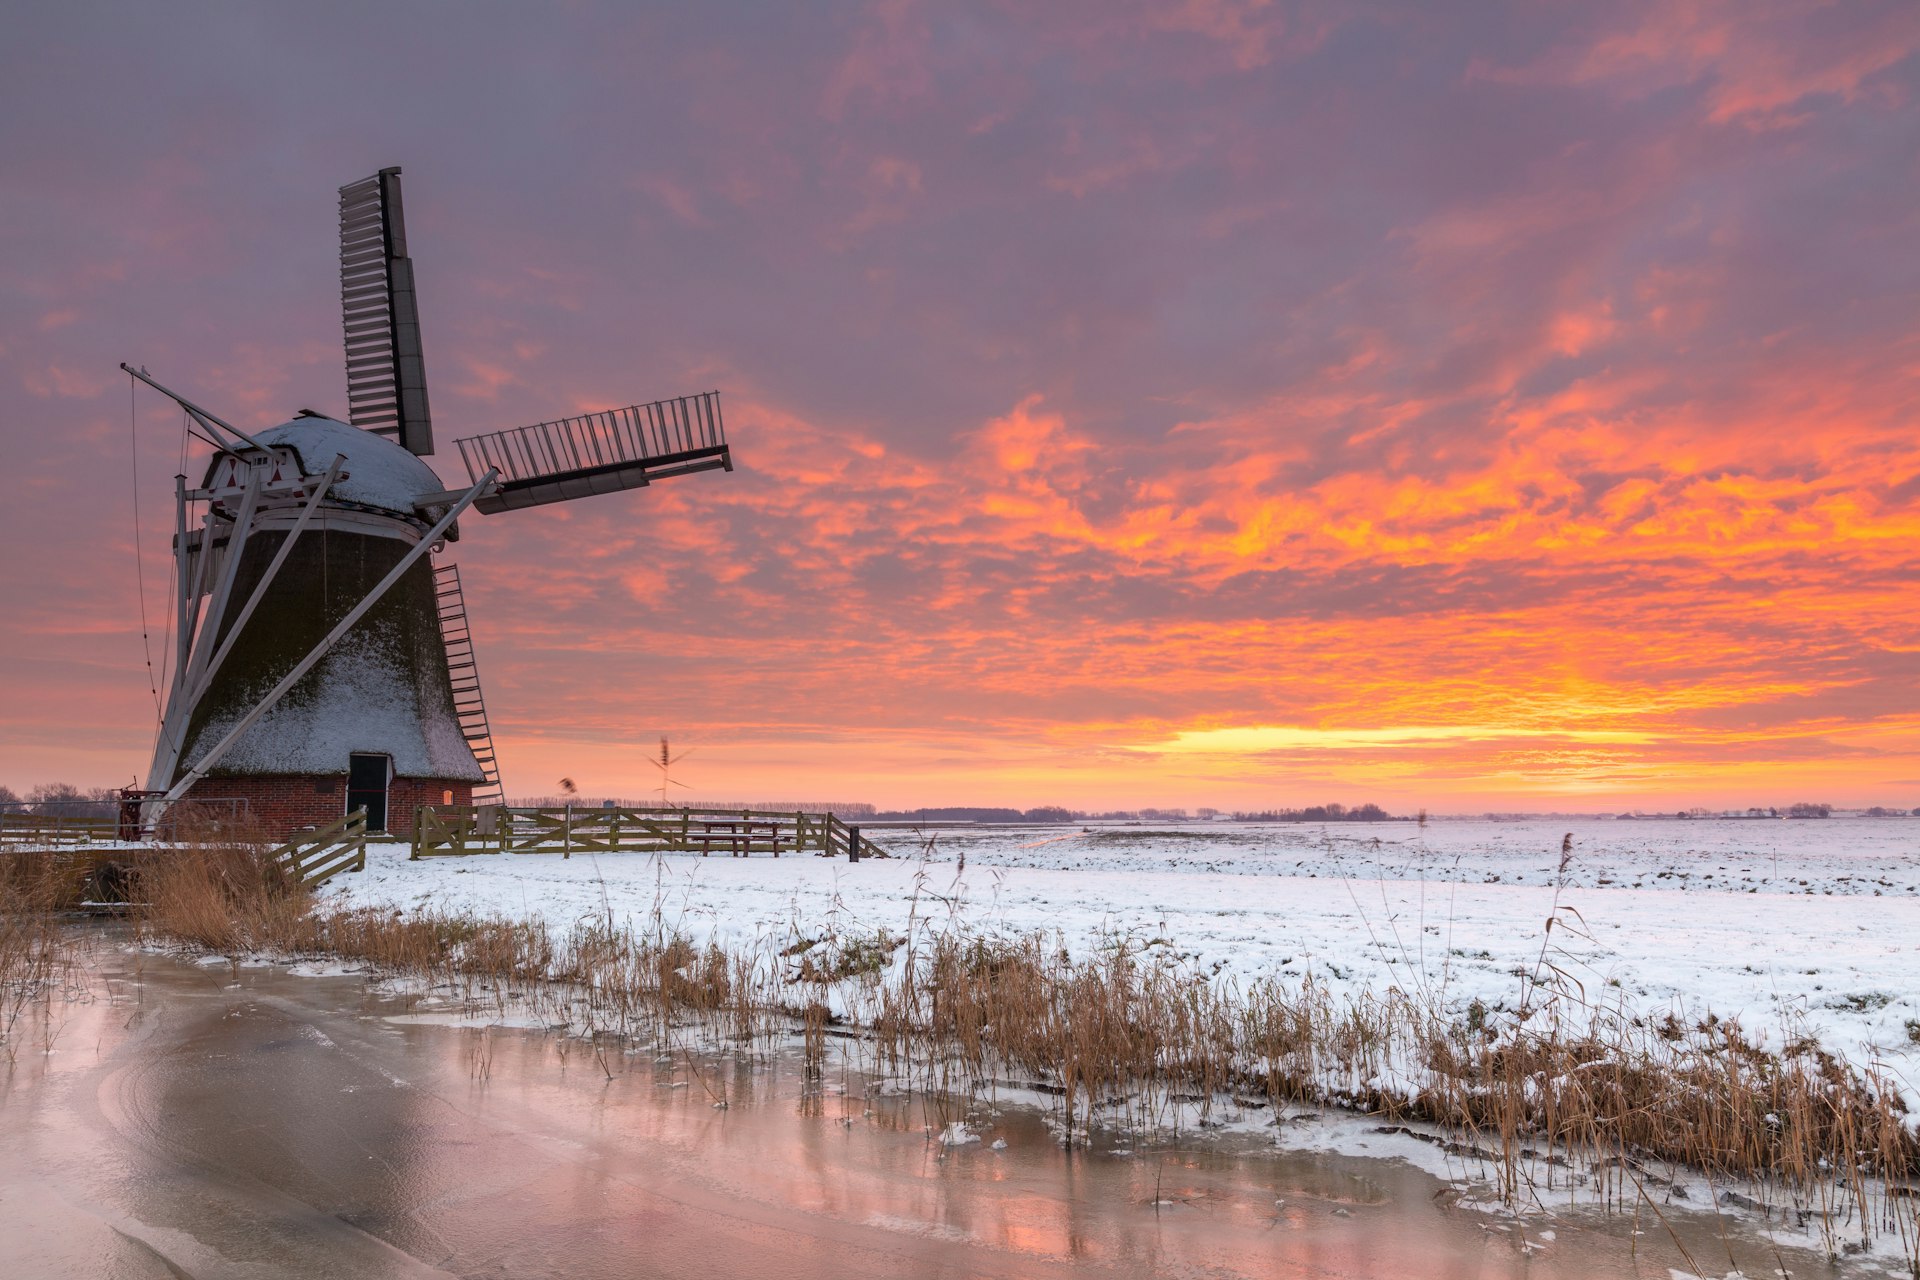 Meervogel windmill at sunset in winter with ice and snow in the foreground